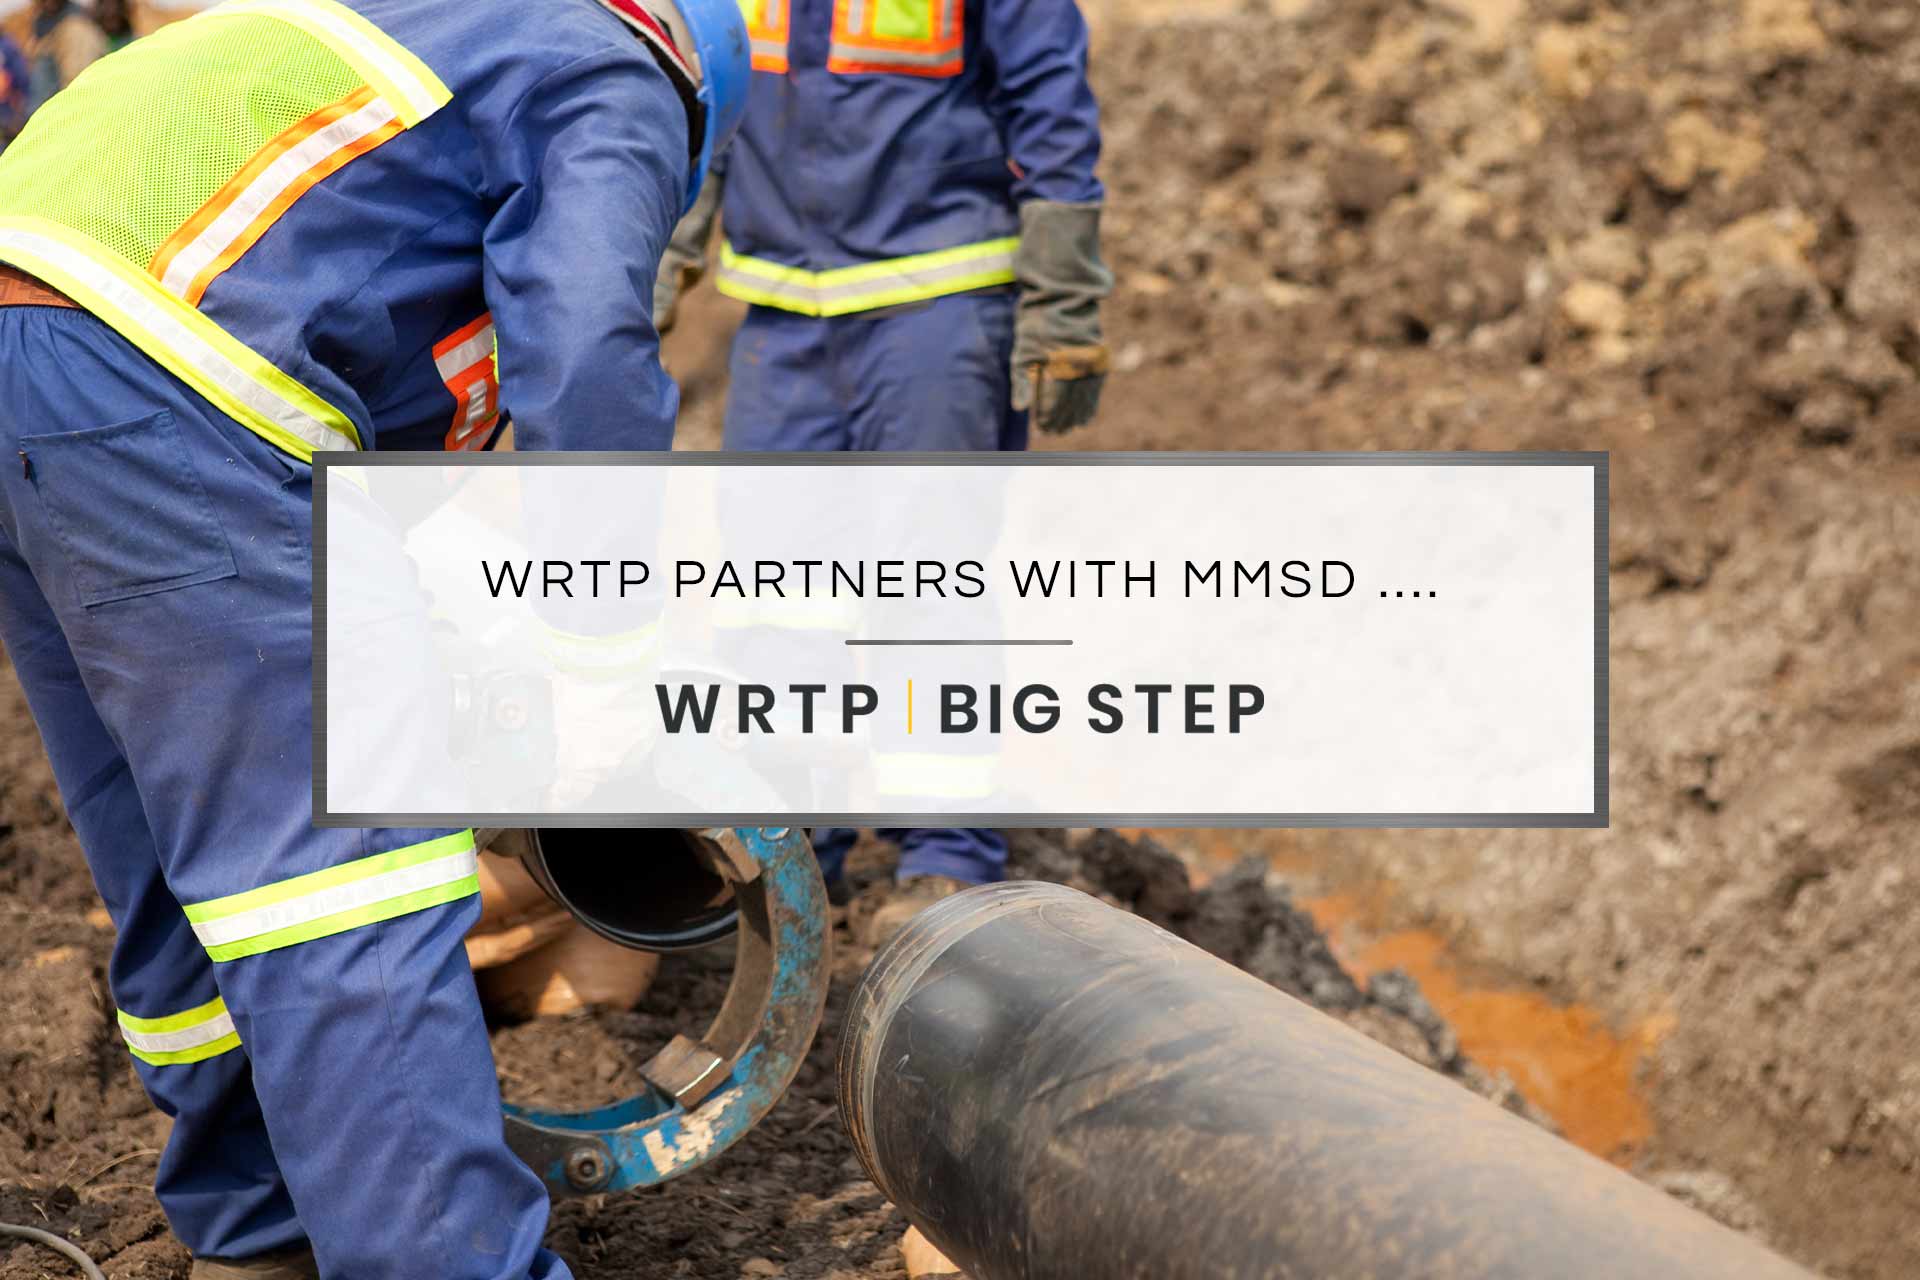 WRTP Partners with MMSD to Improve Workforce in the Water Industry